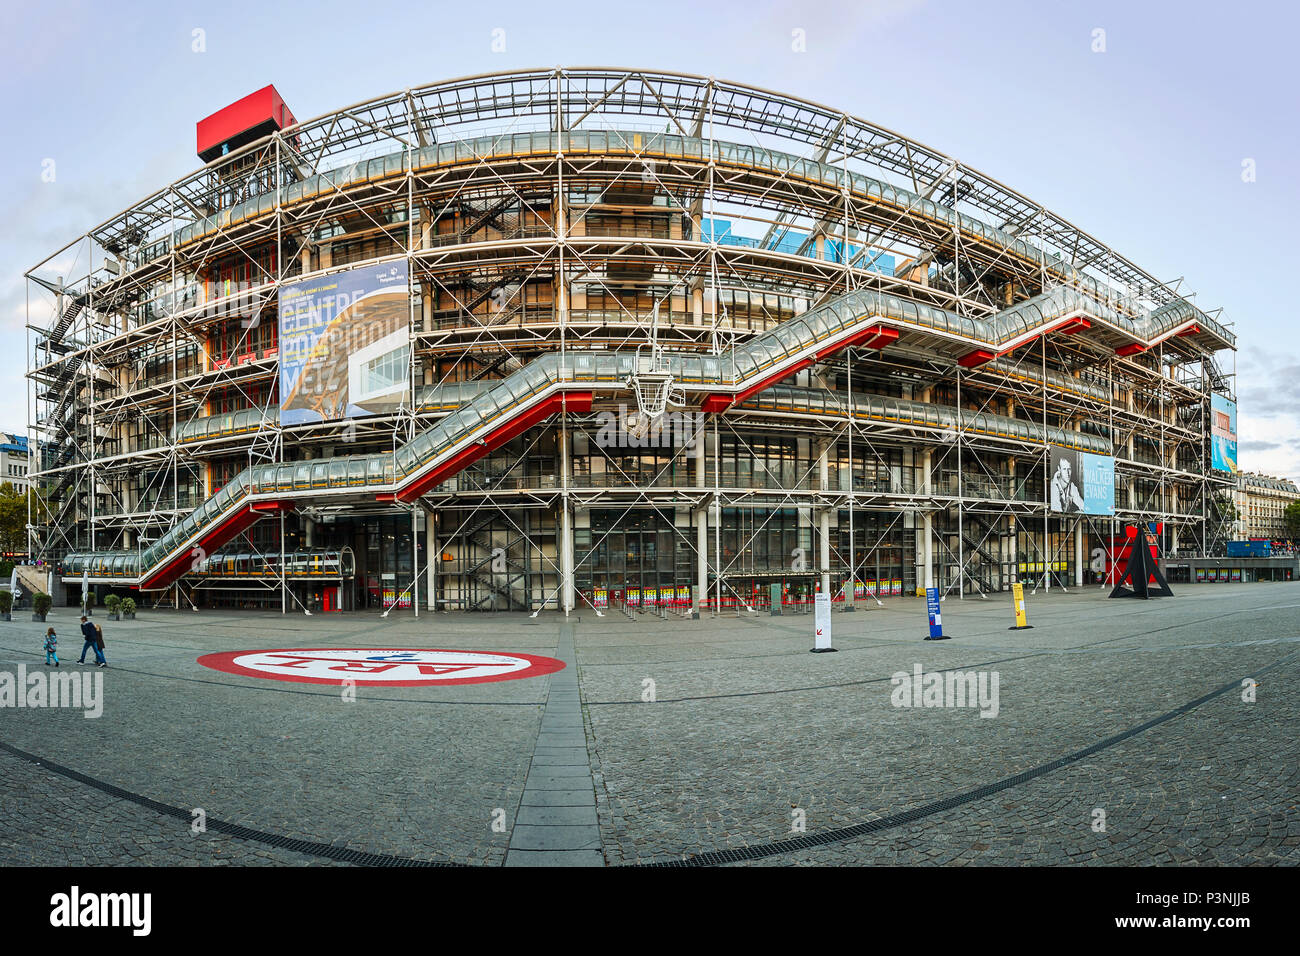 PARIS, FRANCE - 09 AUGUST, 2017: Centre Georges Pompidou. Architects Richard Rogers and Renzo Piano was designed in style of high-tech architecture. Stock Photo